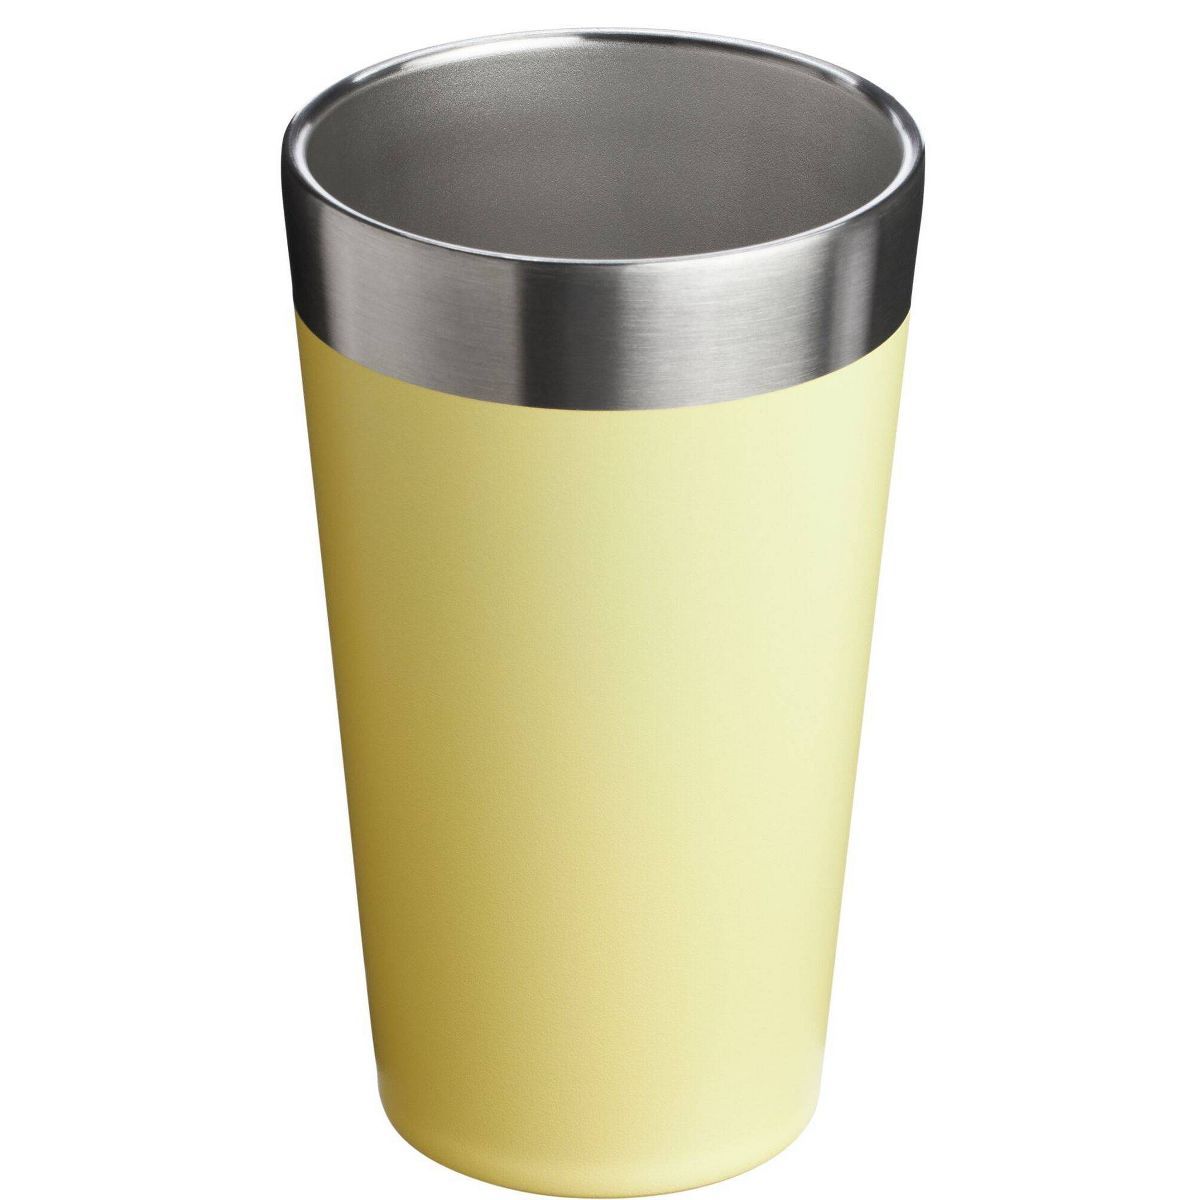 Stanley 16 oz Stainless Steel Stacking Pint | Target